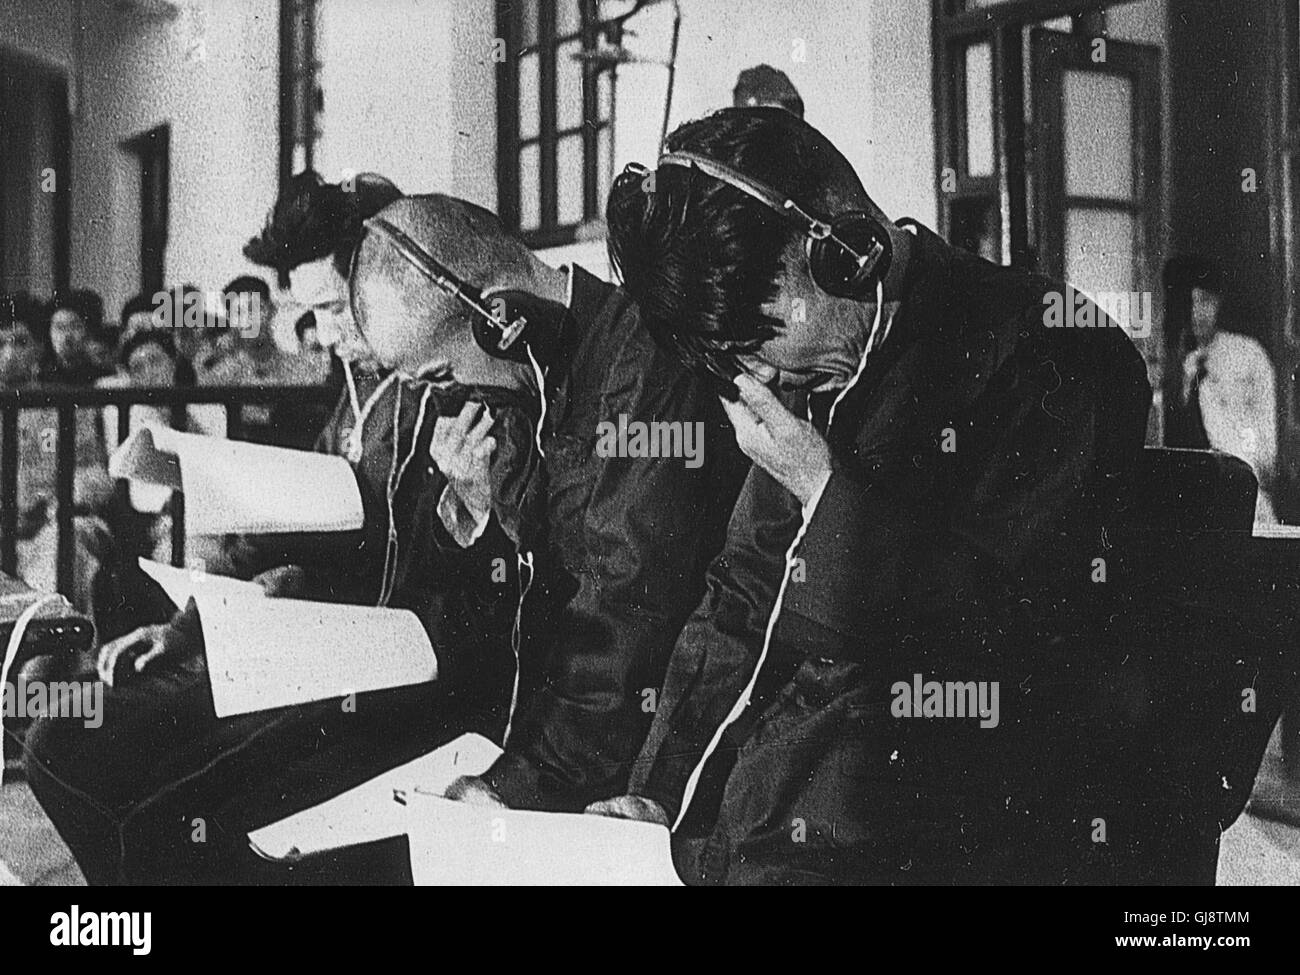 (160814) -- BEIJING, Aug. 14, 2016 (Xinhua) -- File photo taken in 1956 shows Japanese war criminals being tried at a special military court in Taiyuan, north China's Shanxi Province. On Aug. 15, 1945, Japanese Emperor Hirohito delivered a recorded radio address to the nation, announcing the surrender of Japan in World War II, one day after Japan declared its acceptance of the provisions of the Potsdam Proclamation jointly issued by China, the United States and Britain on July 26, 1945, with the Soviet Union joining later. More than 35 million Chinese were killed or injured in the war of resis Stock Photo